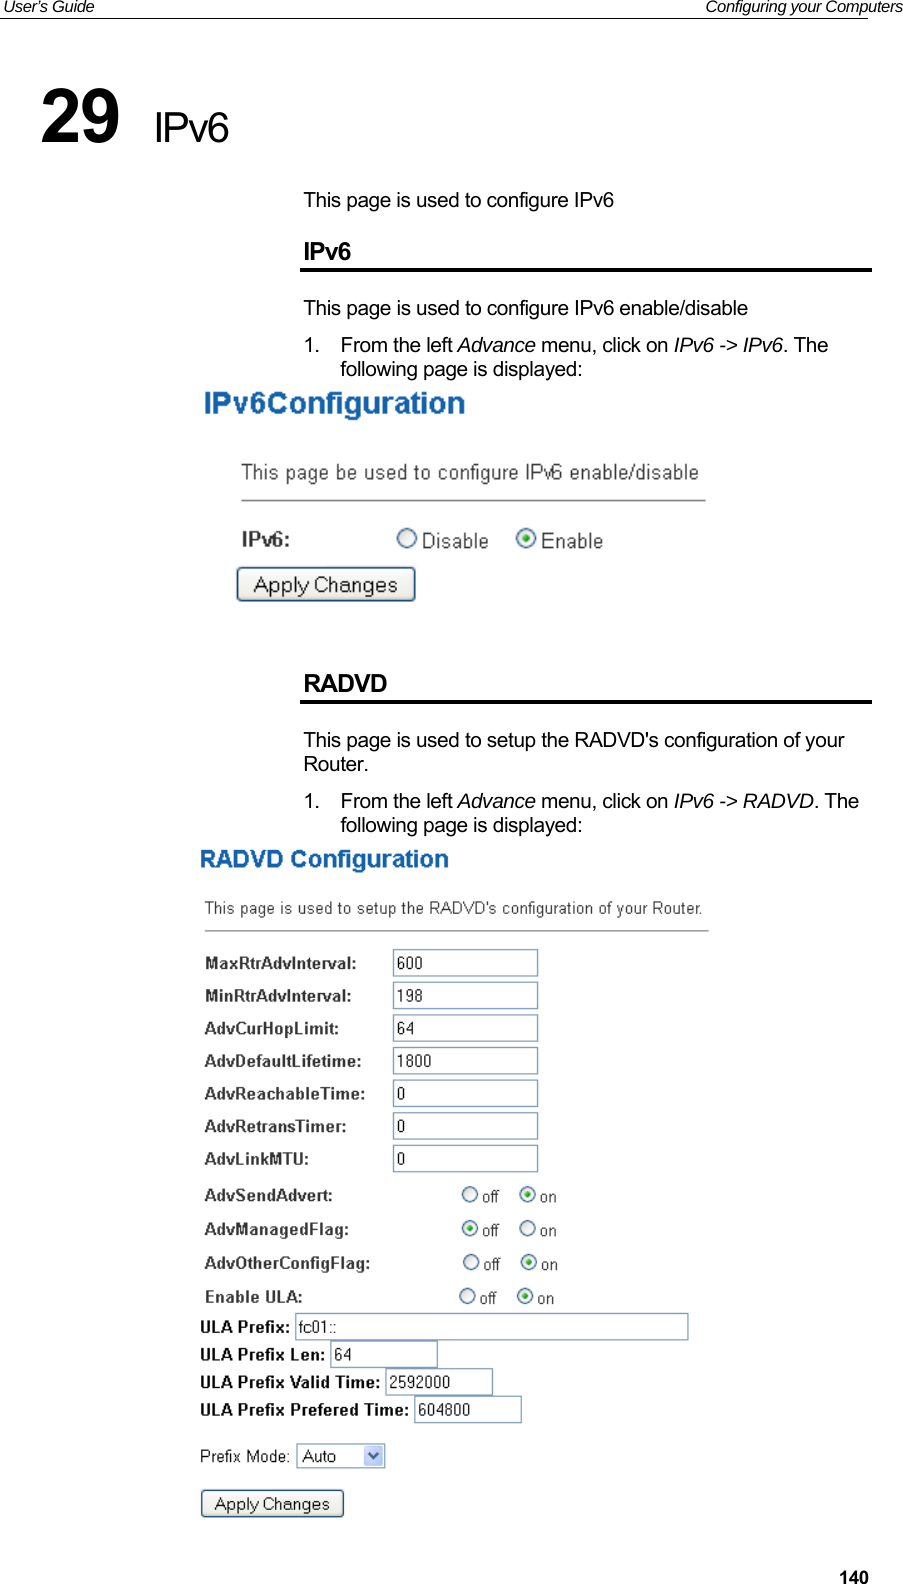 User’s Guide   Configuring your Computers  14029  IPv6 This page is used to configure IPv6 IPv6 This page is used to configure IPv6 enable/disable 1.  From the left Advance menu, click on IPv6 -&gt; IPv6. The following page is displayed:   RADVD This page is used to setup the RADVD&apos;s configuration of your Router. 1.  From the left Advance menu, click on IPv6 -&gt; RADVD. The following page is displayed:  